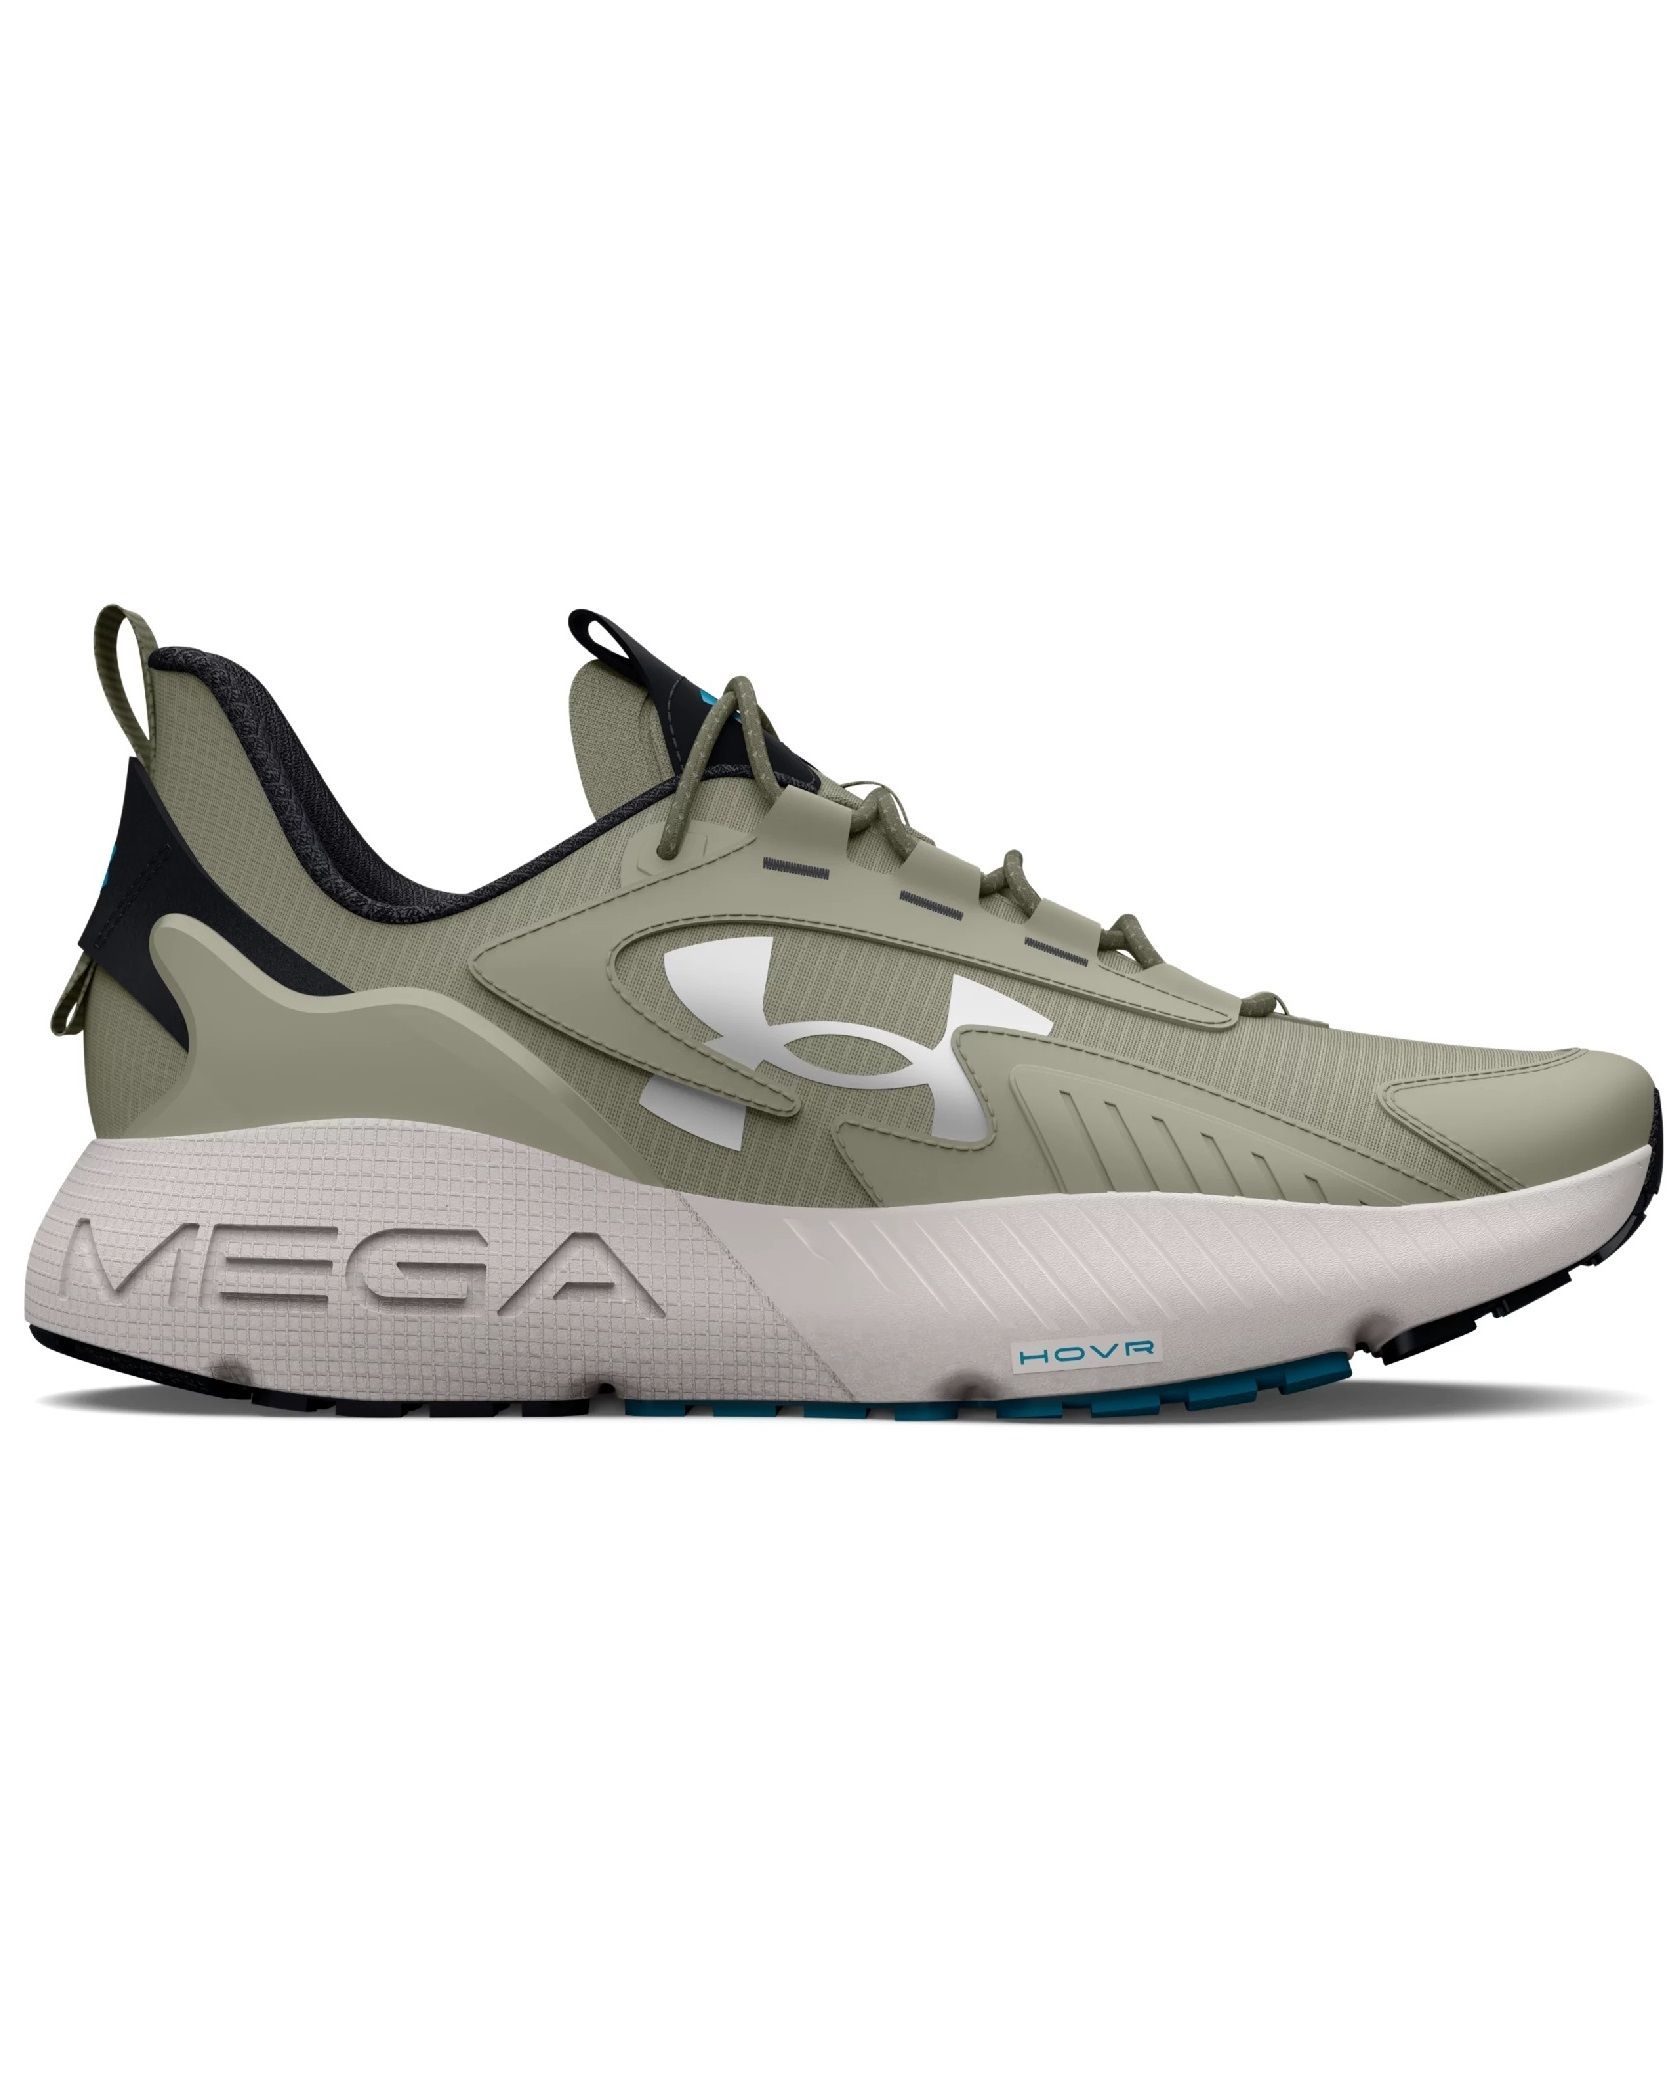 Under Armour Hovr - Buy Under Armour Hovr online in India